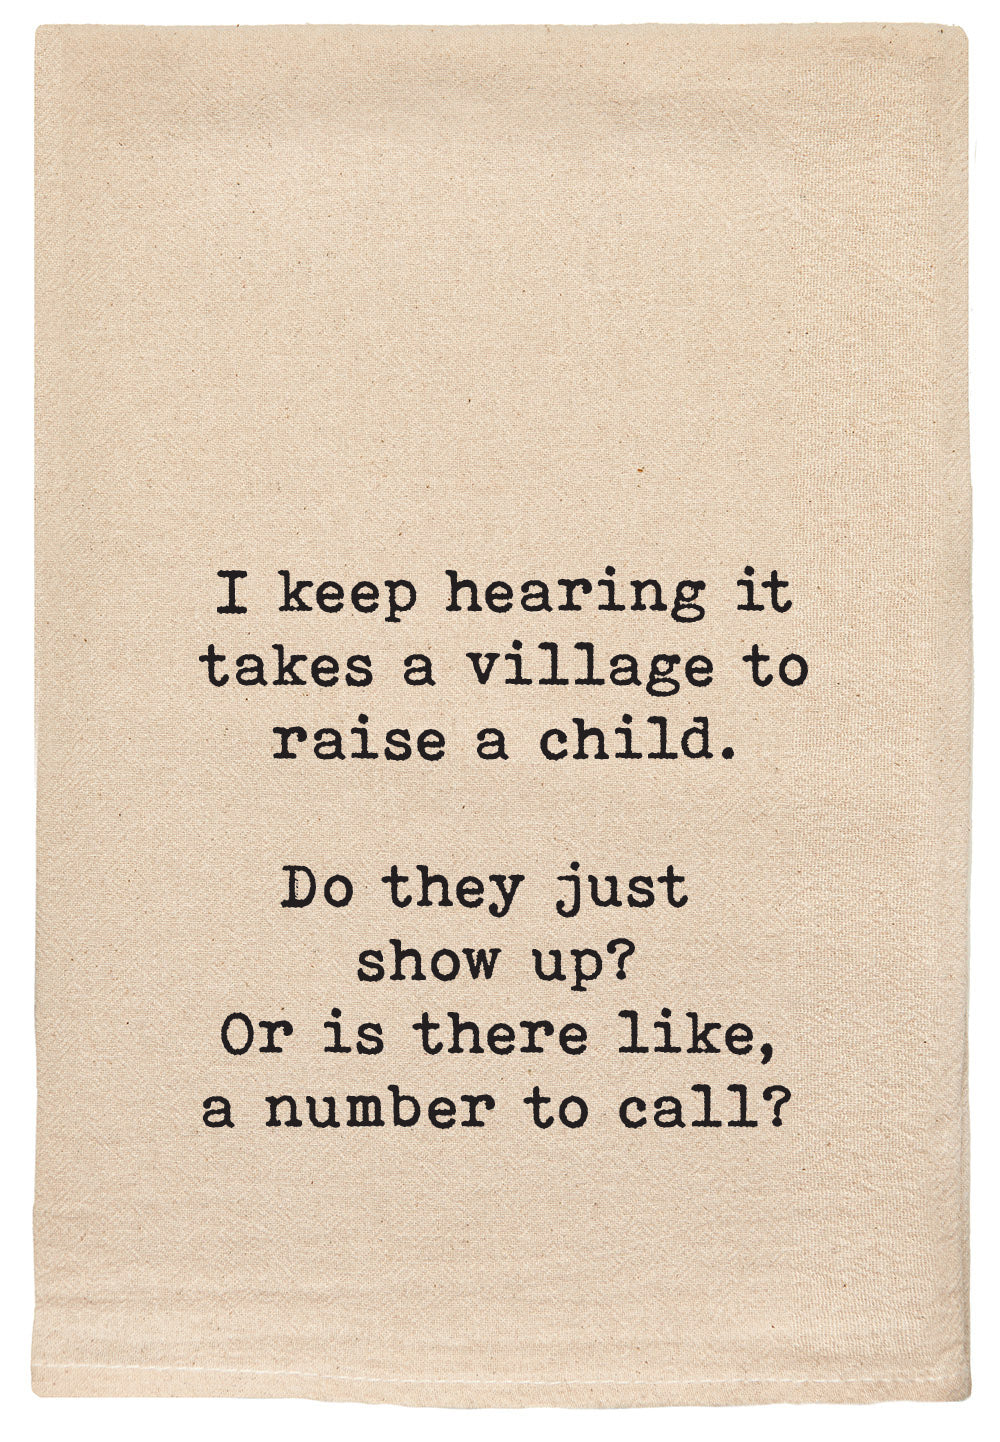 I keep hearing it takes a village to raise a child. Do they just show up? Or is there like, a number to call?